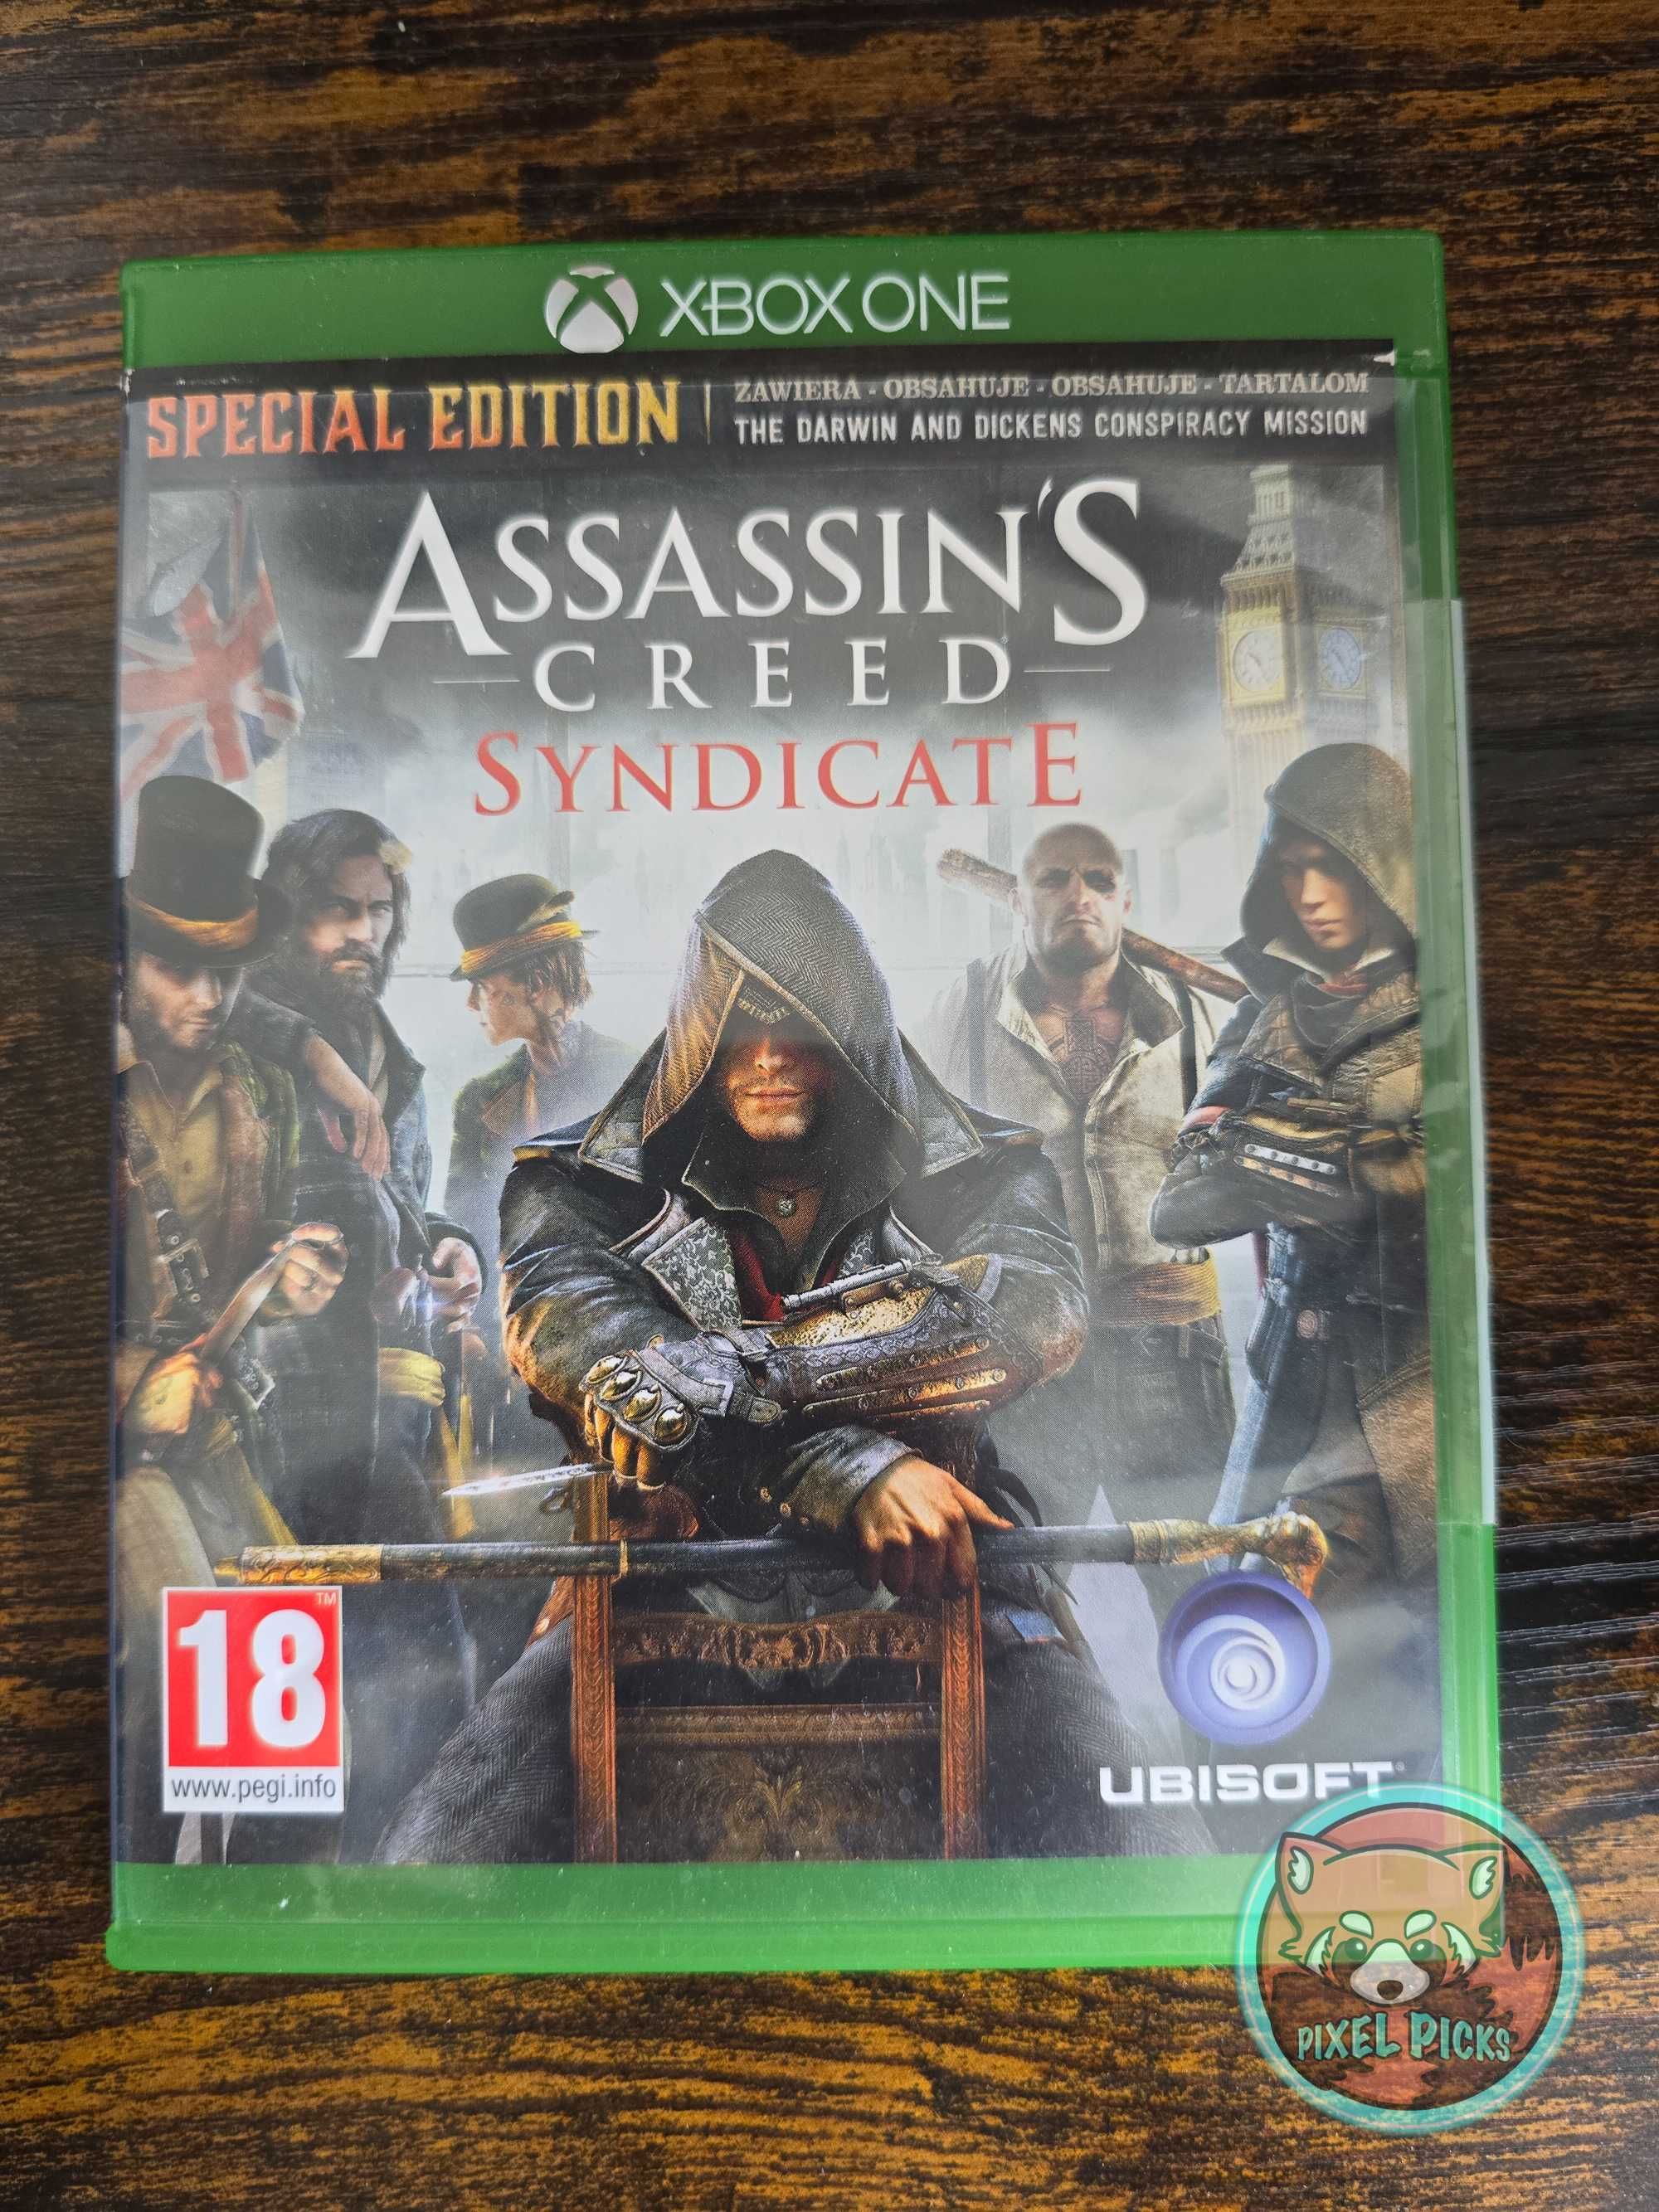 Assassins creed syndicate xbox